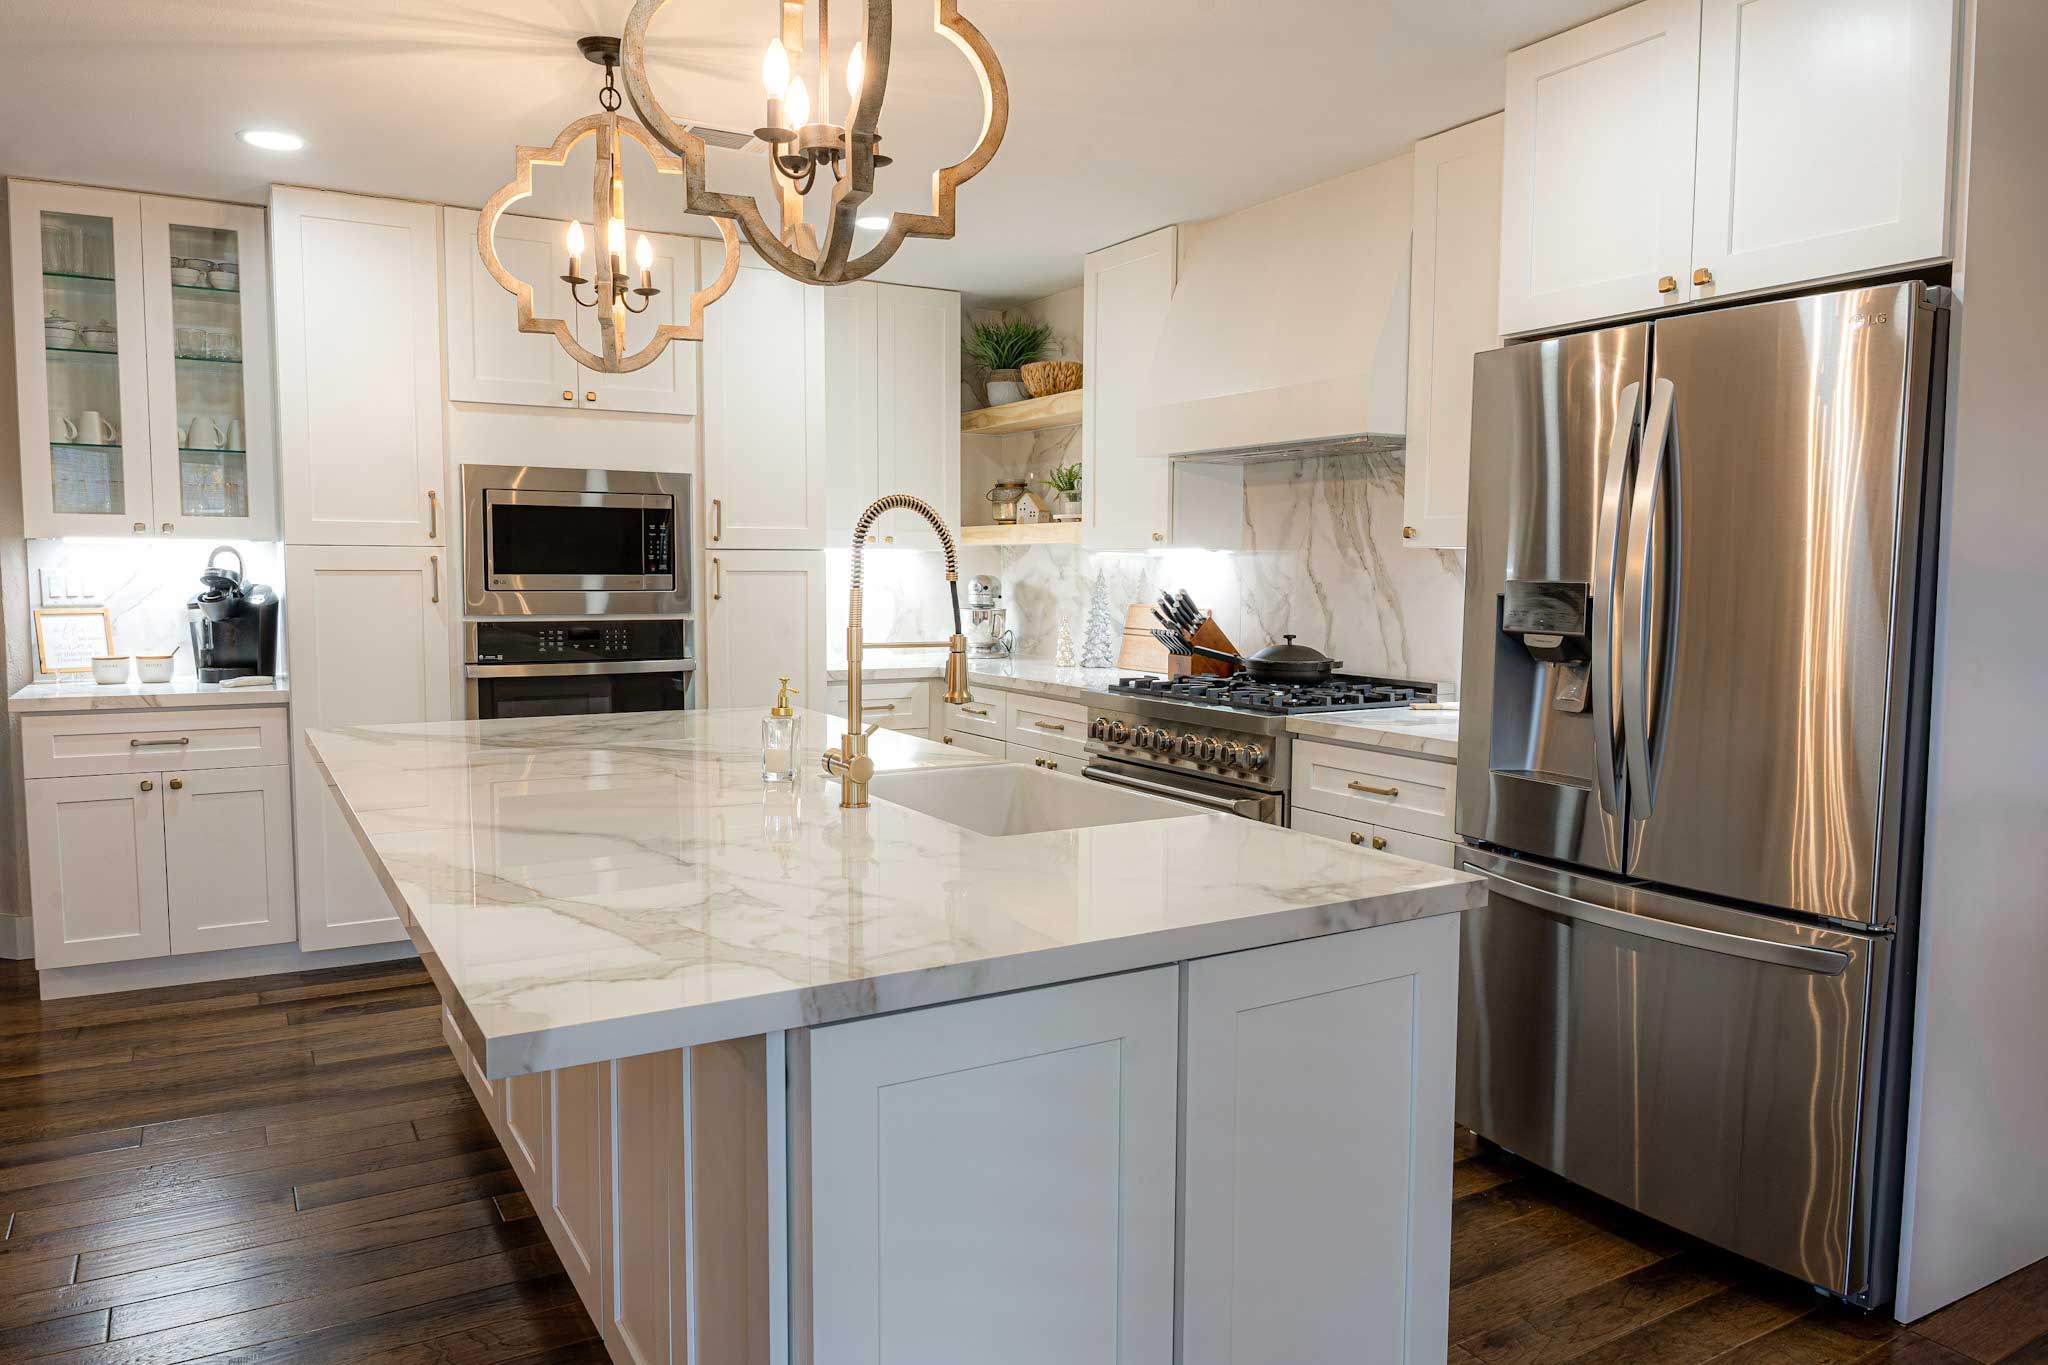 Large-format Porcelain Sintered Stone Kitchen Countertops, Backsplash, and Island in White Classico